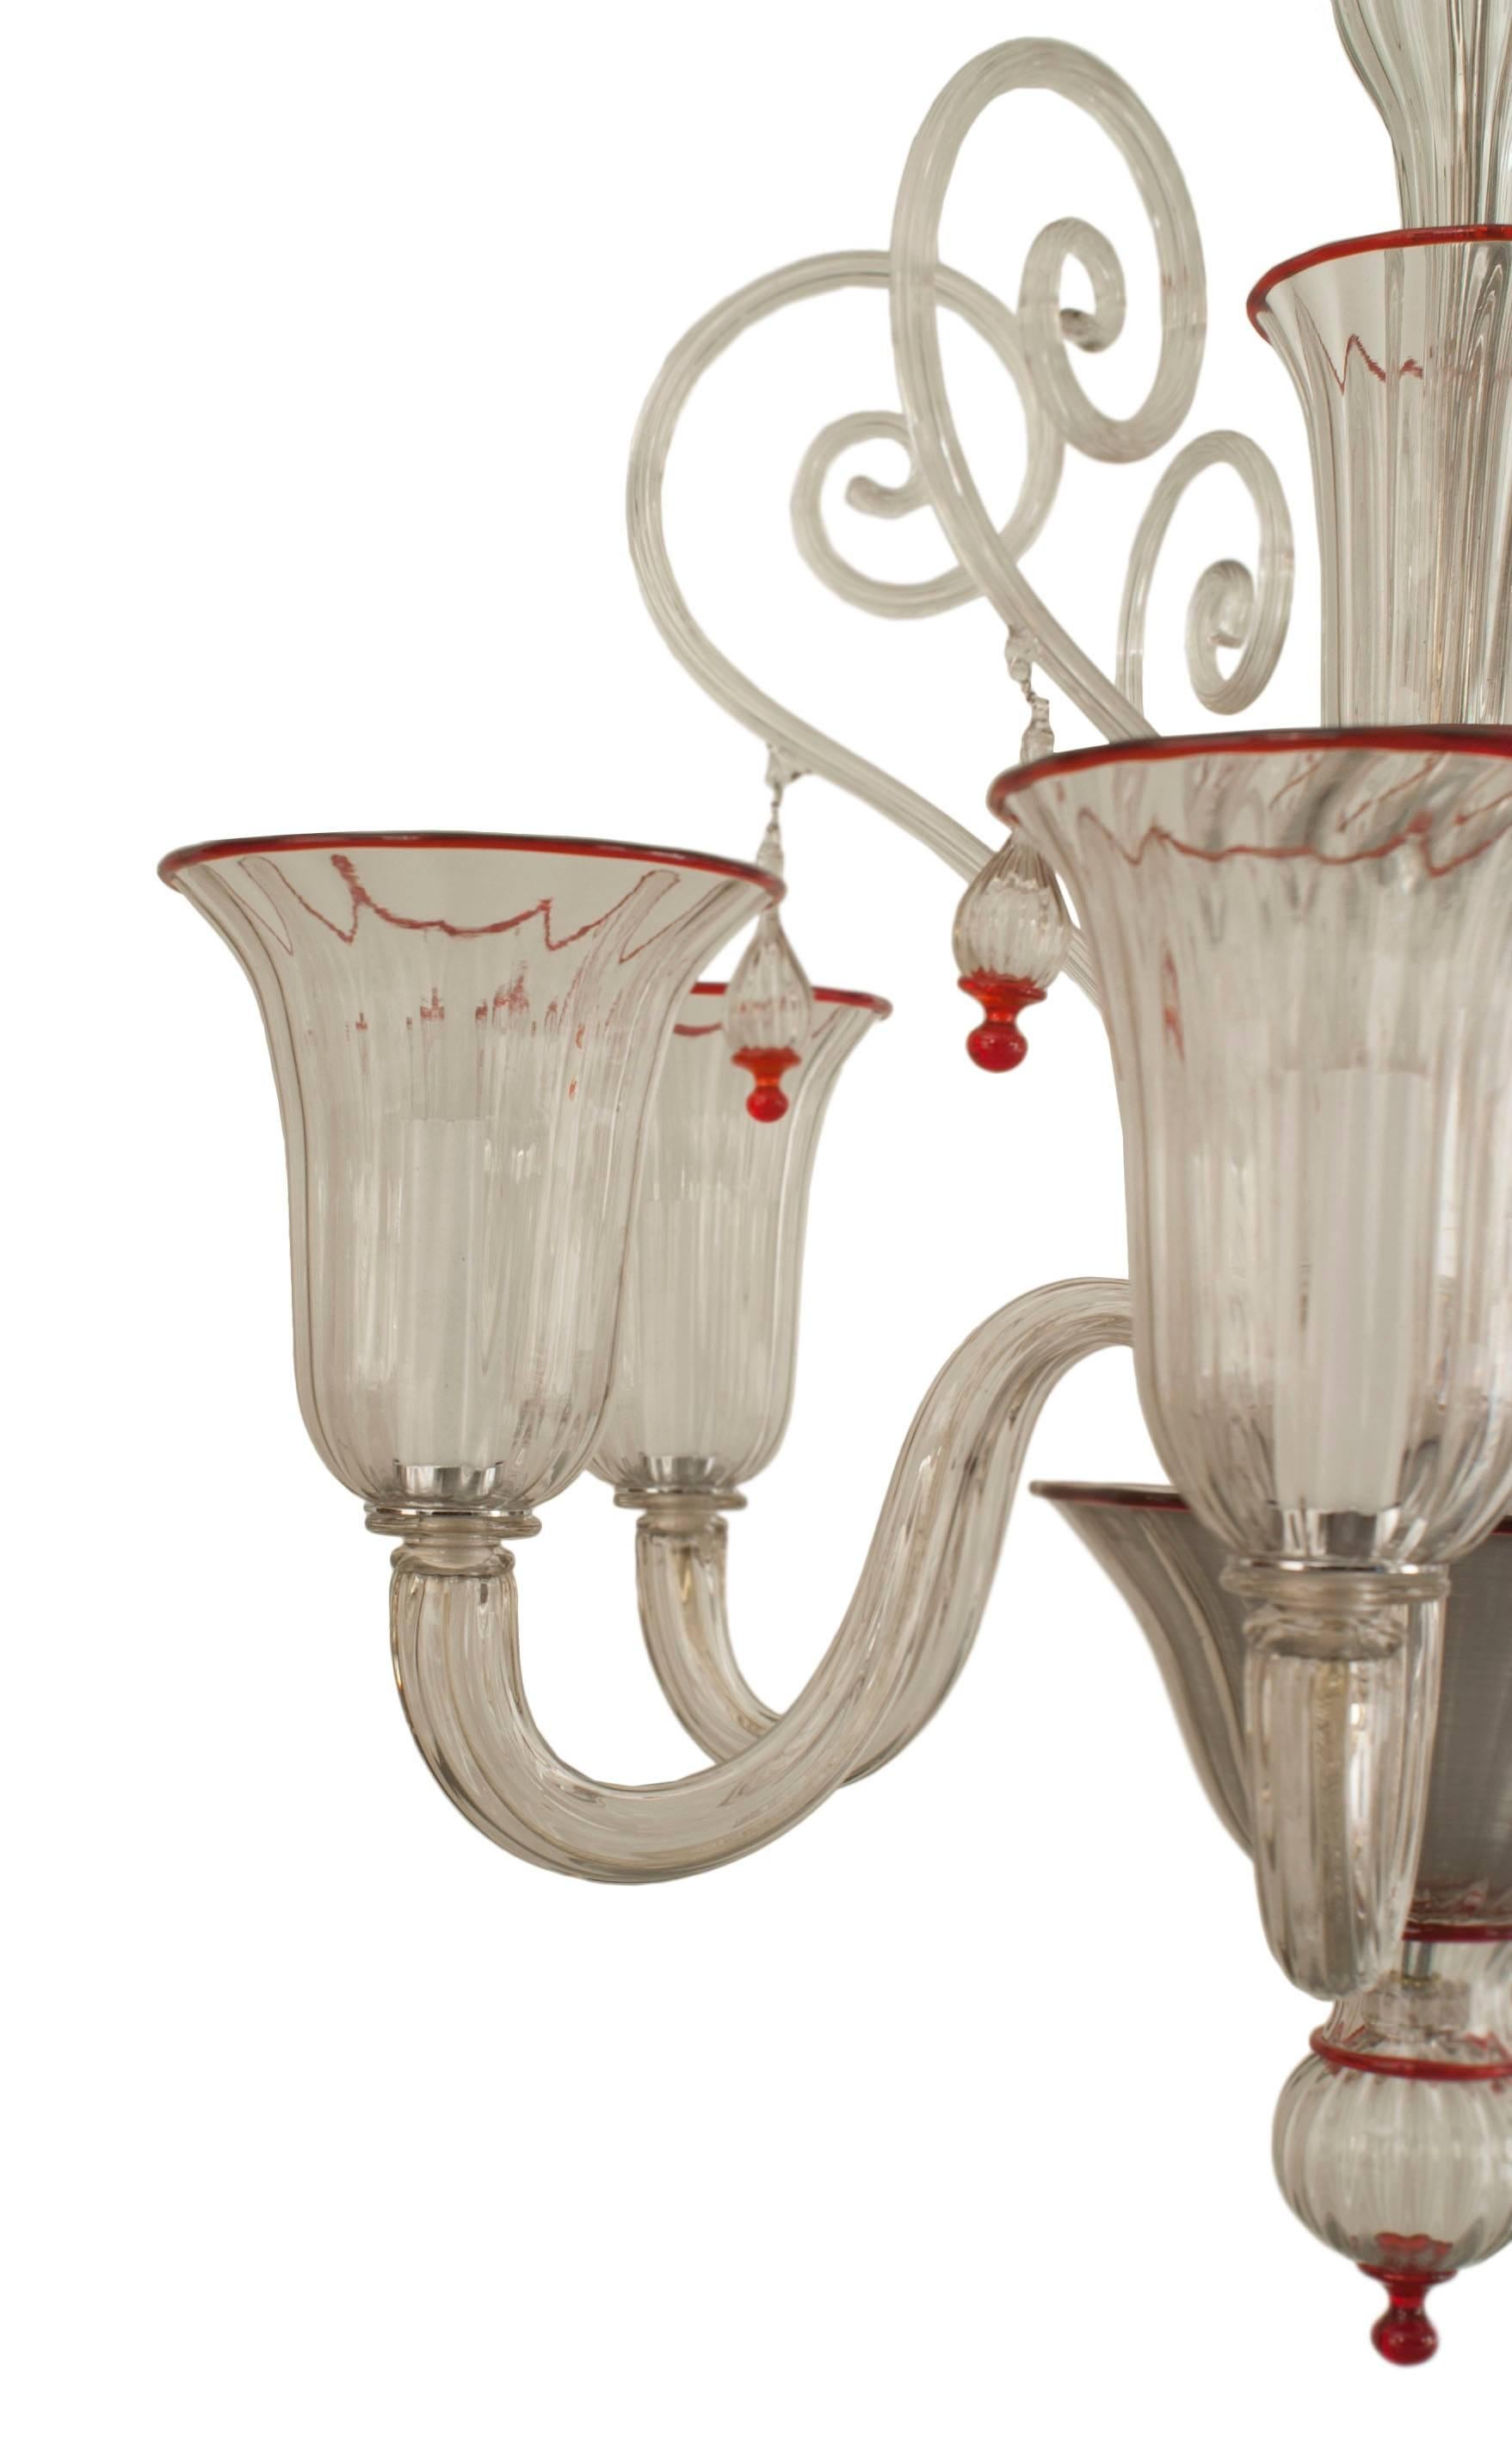 Italian Venetian-Style (1940s) Murano clear glass and red trimmed chandelier with 6 fluted scroll arms with large cups with 6 large glass scrolls emanating from a 3-tier center shaft with a final bottom
